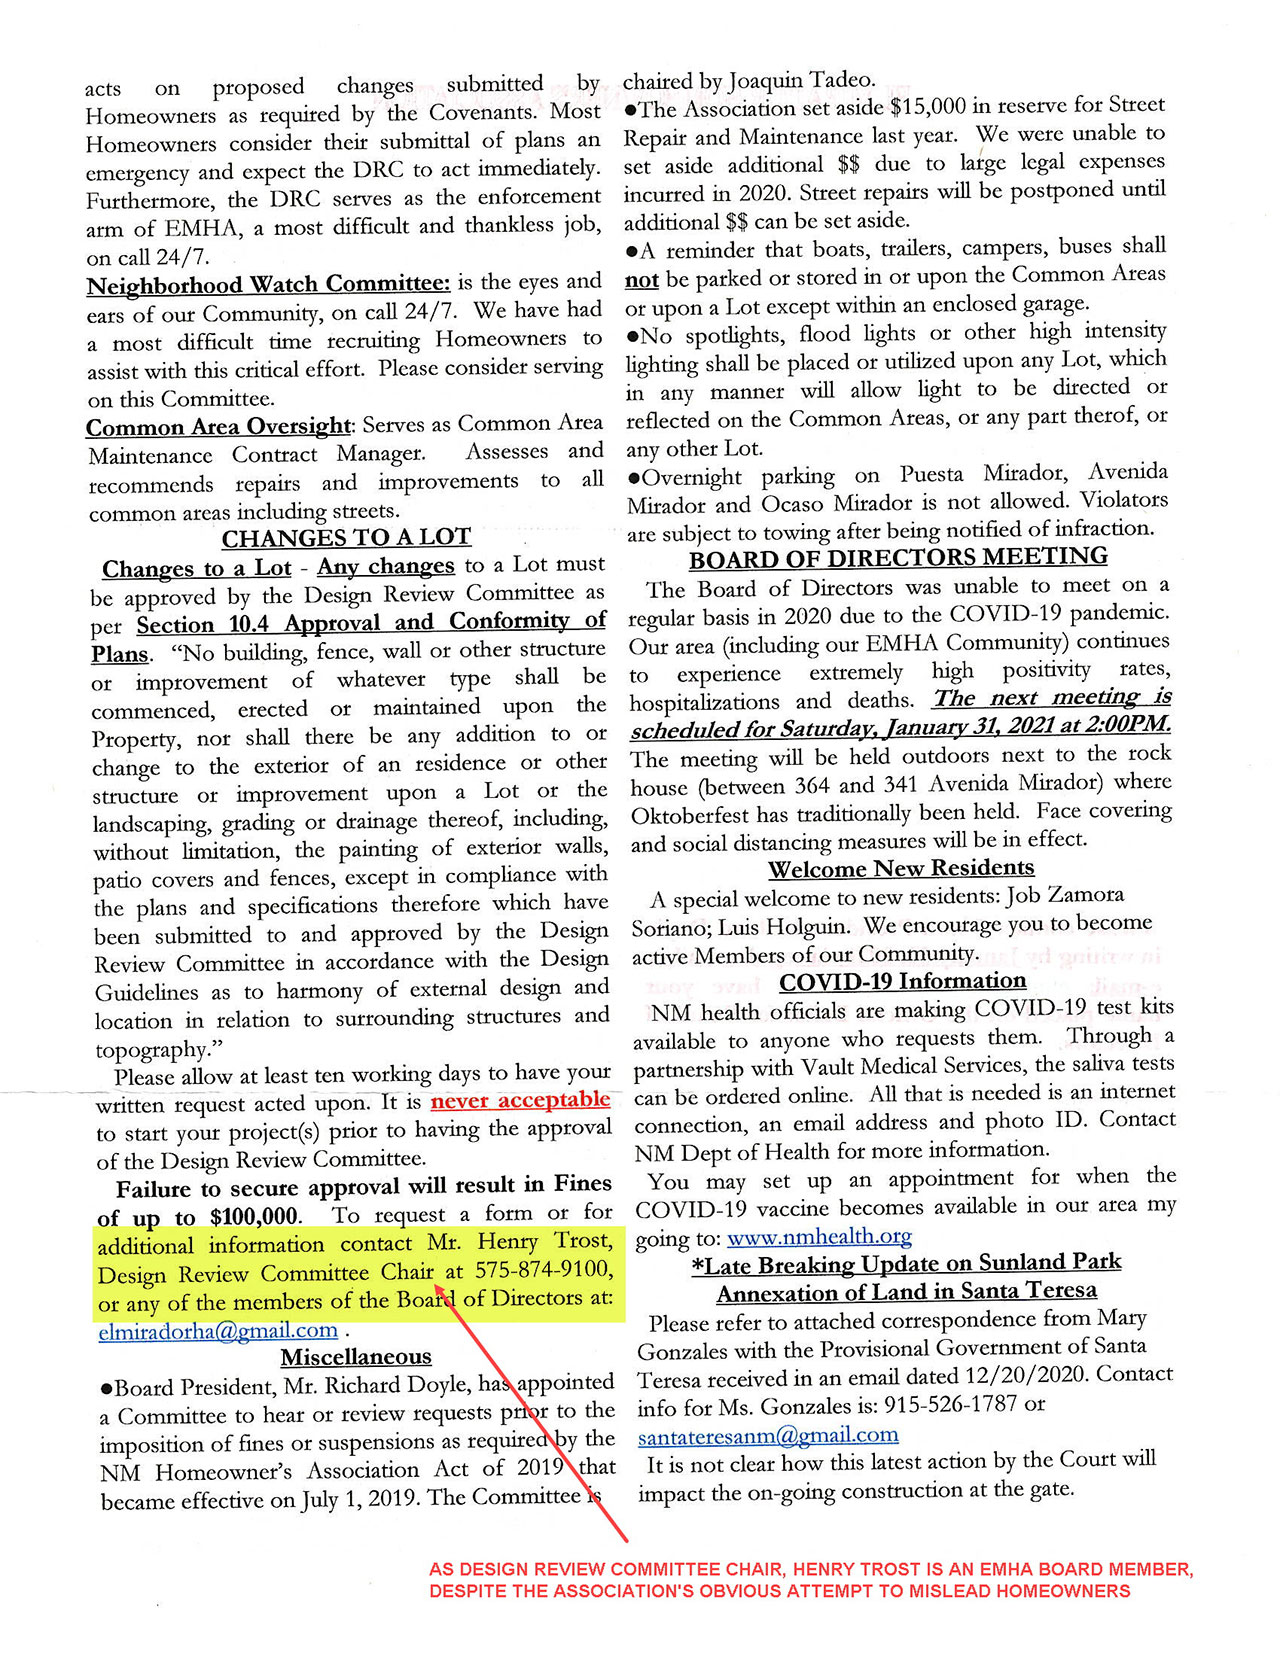 EMHA Newsletter October 2020, showing Trost as Design Review Committee Chair on second page, separated from Board of Directors.